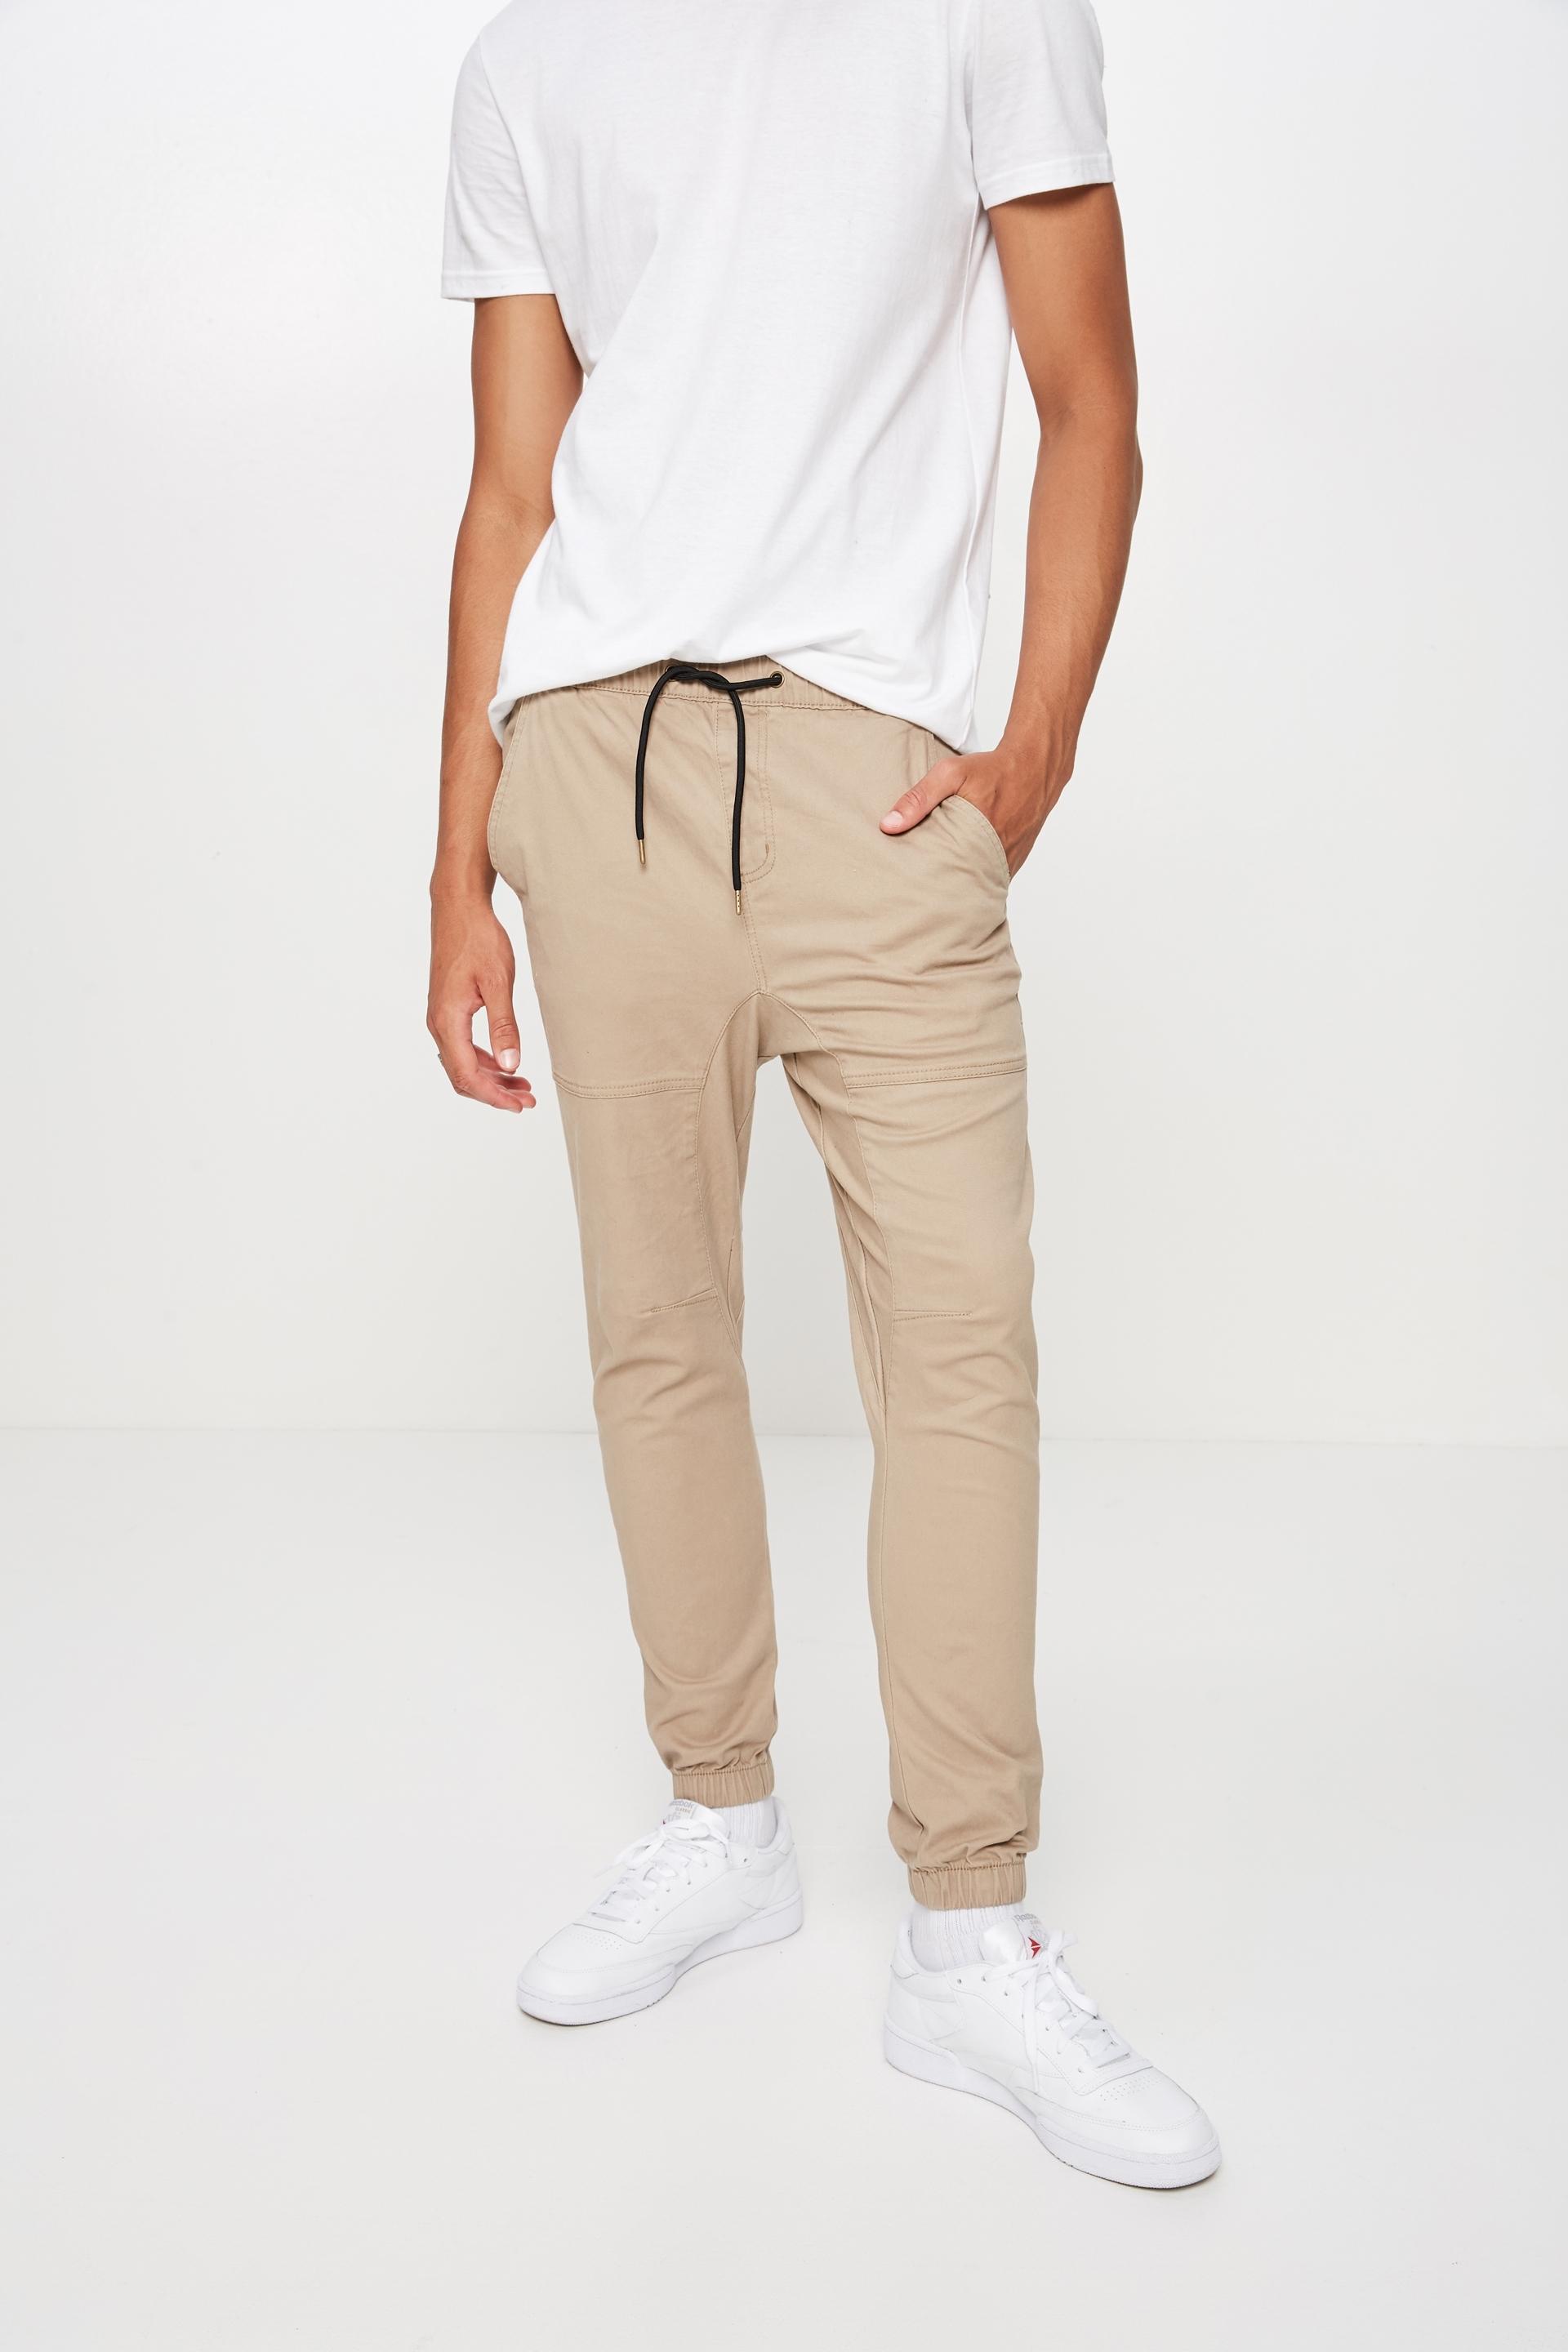 Cuffed pant - stoned Factorie Pants & Chinos | Superbalist.com